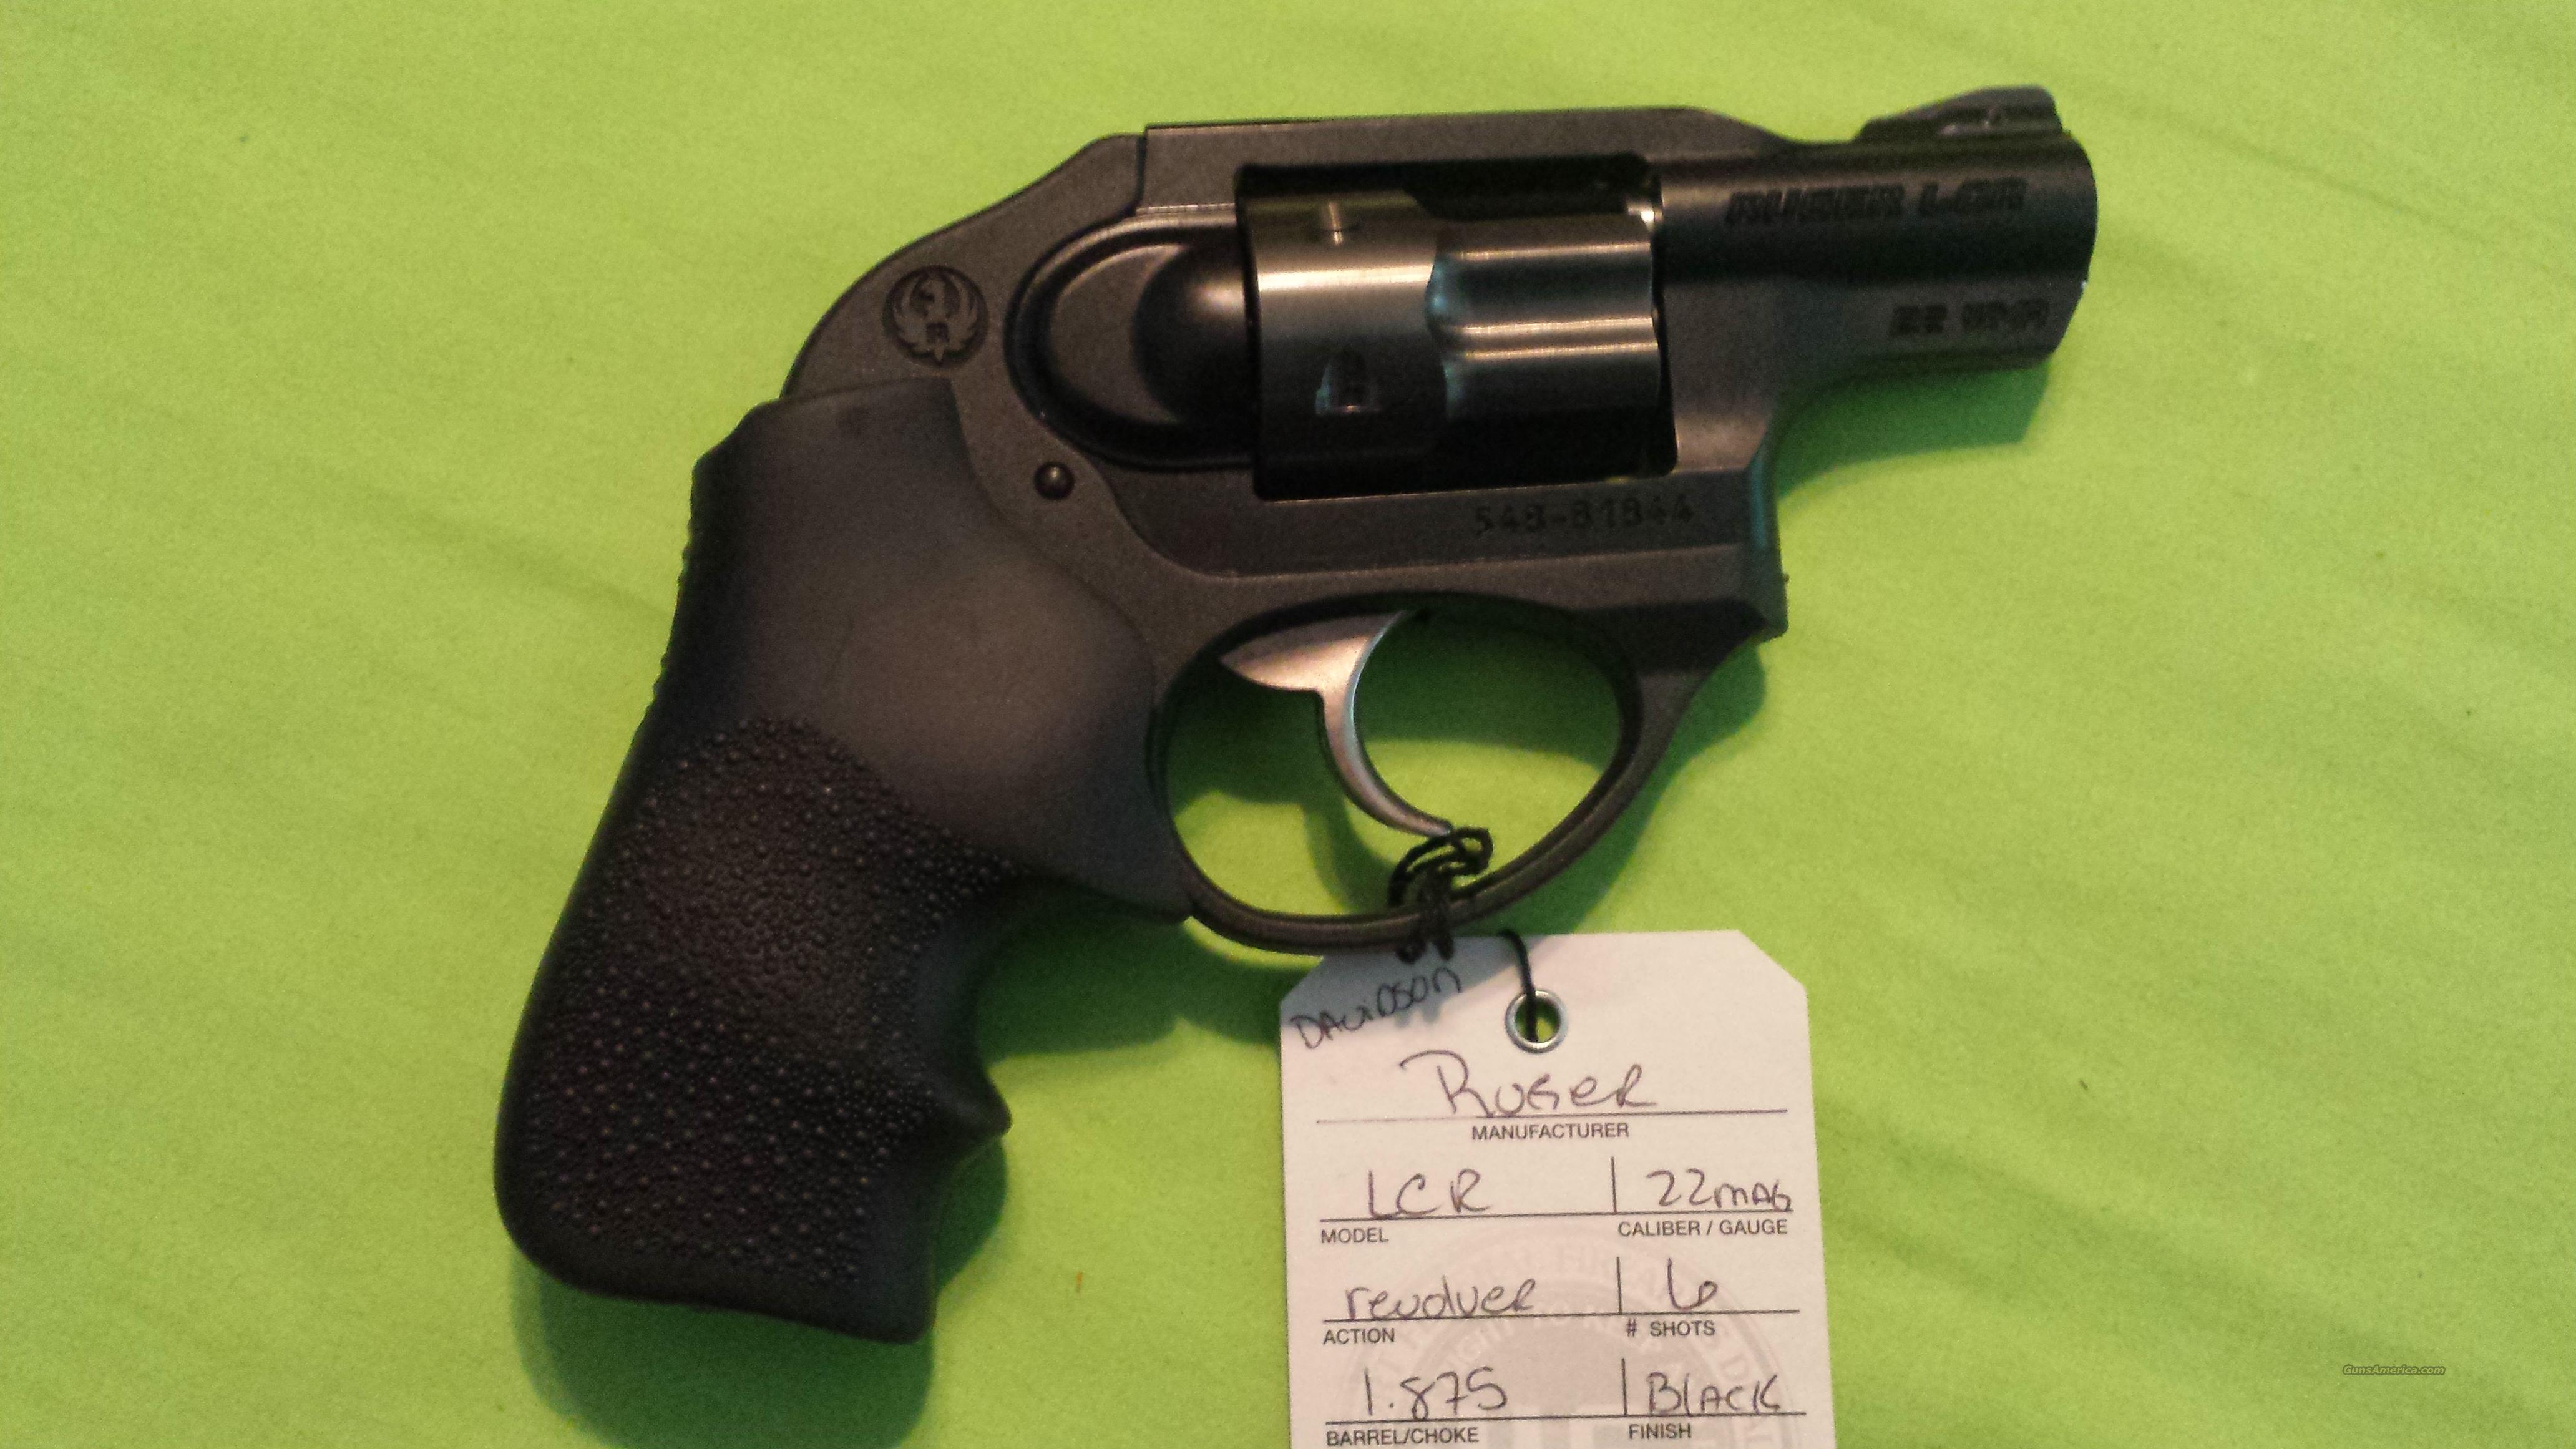 Ruger Lcr 22 Mag 6 Rd Revolver 22 For Sale At 950161244 1632